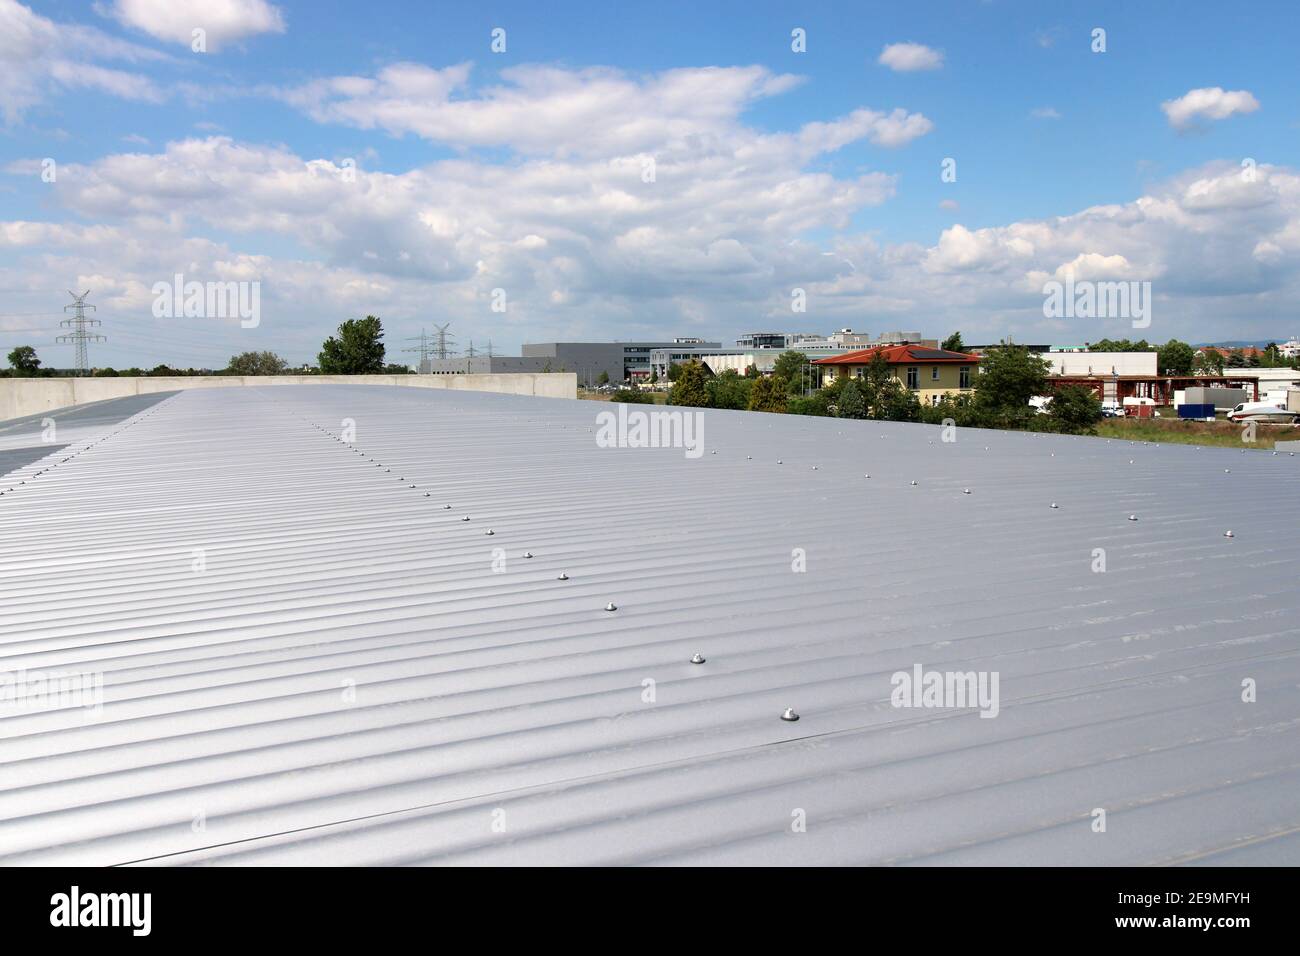 Barrel vault roof on a new warehouse Stock Photo